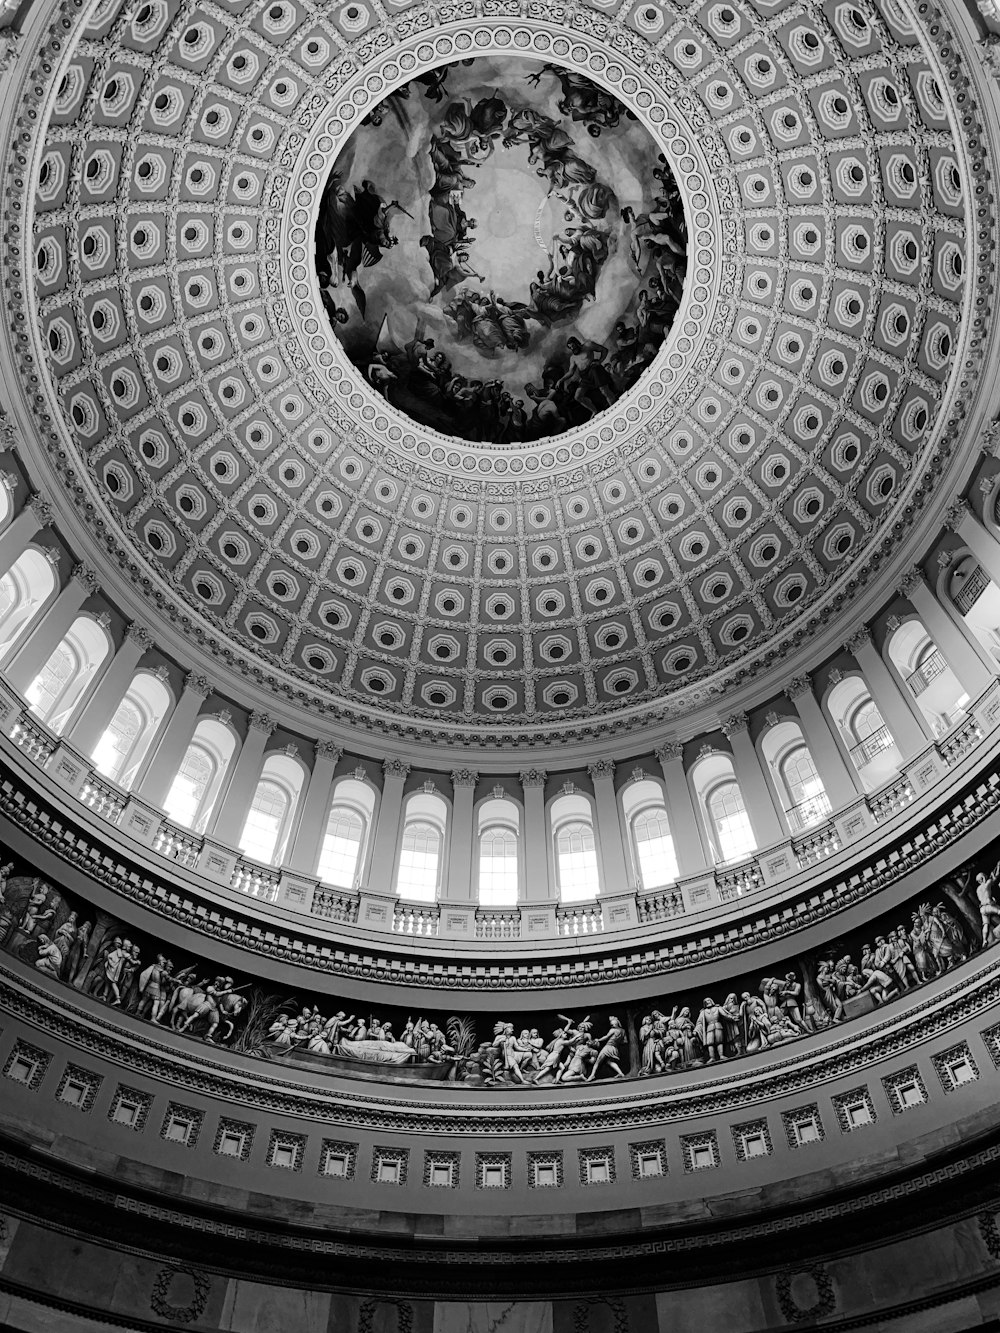 grayscale low-angle photography of dome cathedral ceiling interior